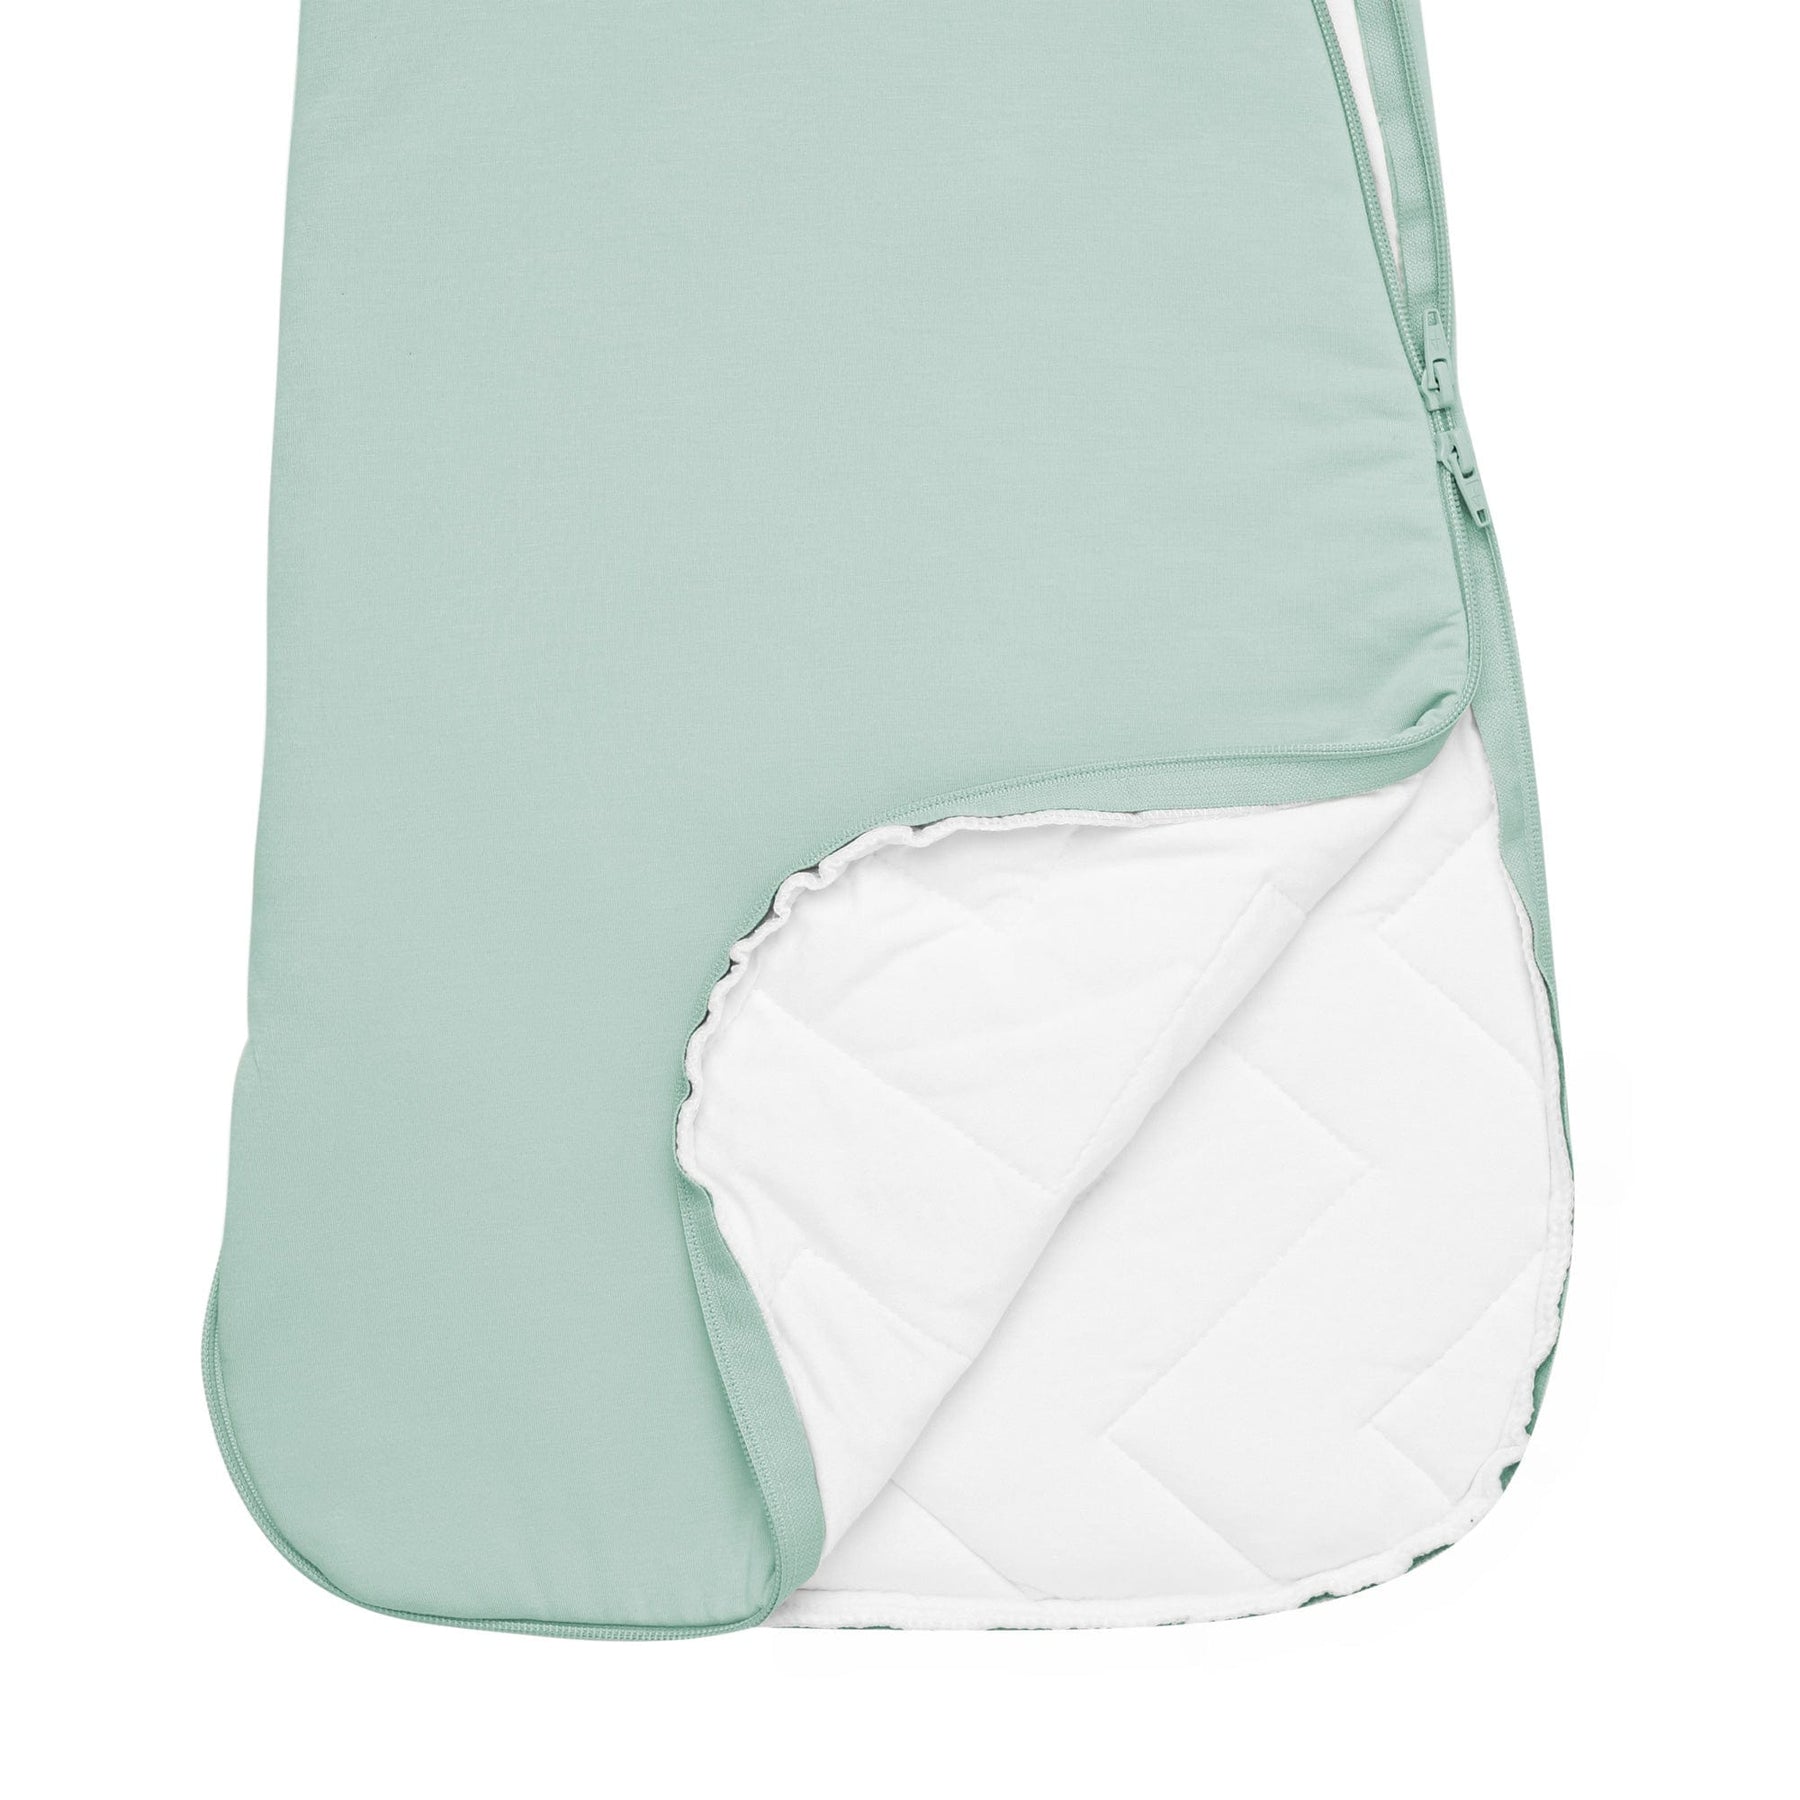 Kyte Baby bamboo Sleep Bag in Sage 2.5 with double zipper and quilted lining